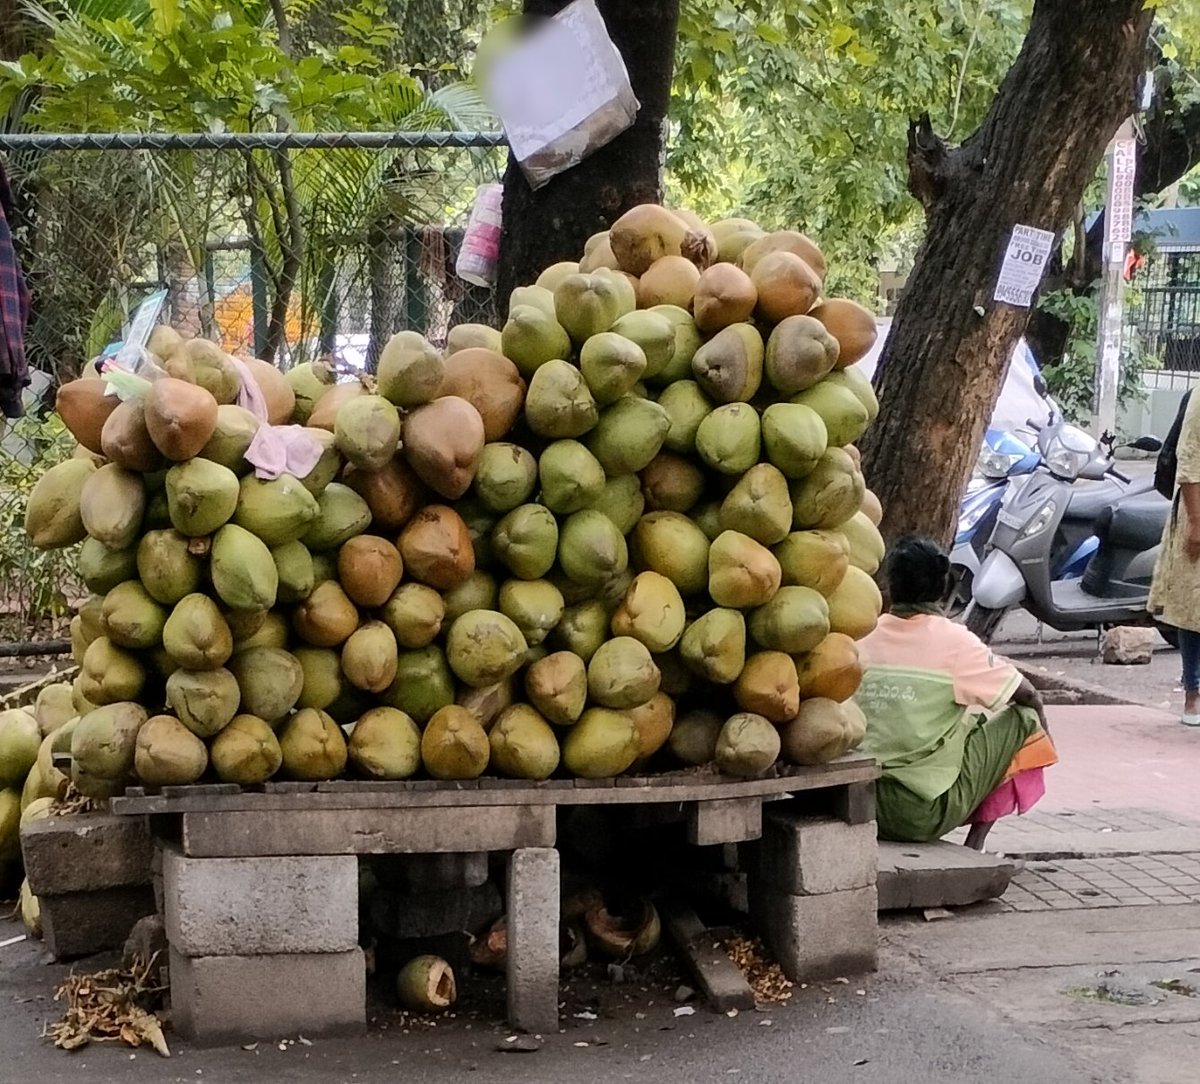 Many people have tried to create a large brand in the tender coconut water segment, but all have failed. Even now, the people who sell tender coconut by the roadside are the undisputed kings. What could be the reason? 

One possible explanation I can think of is that people